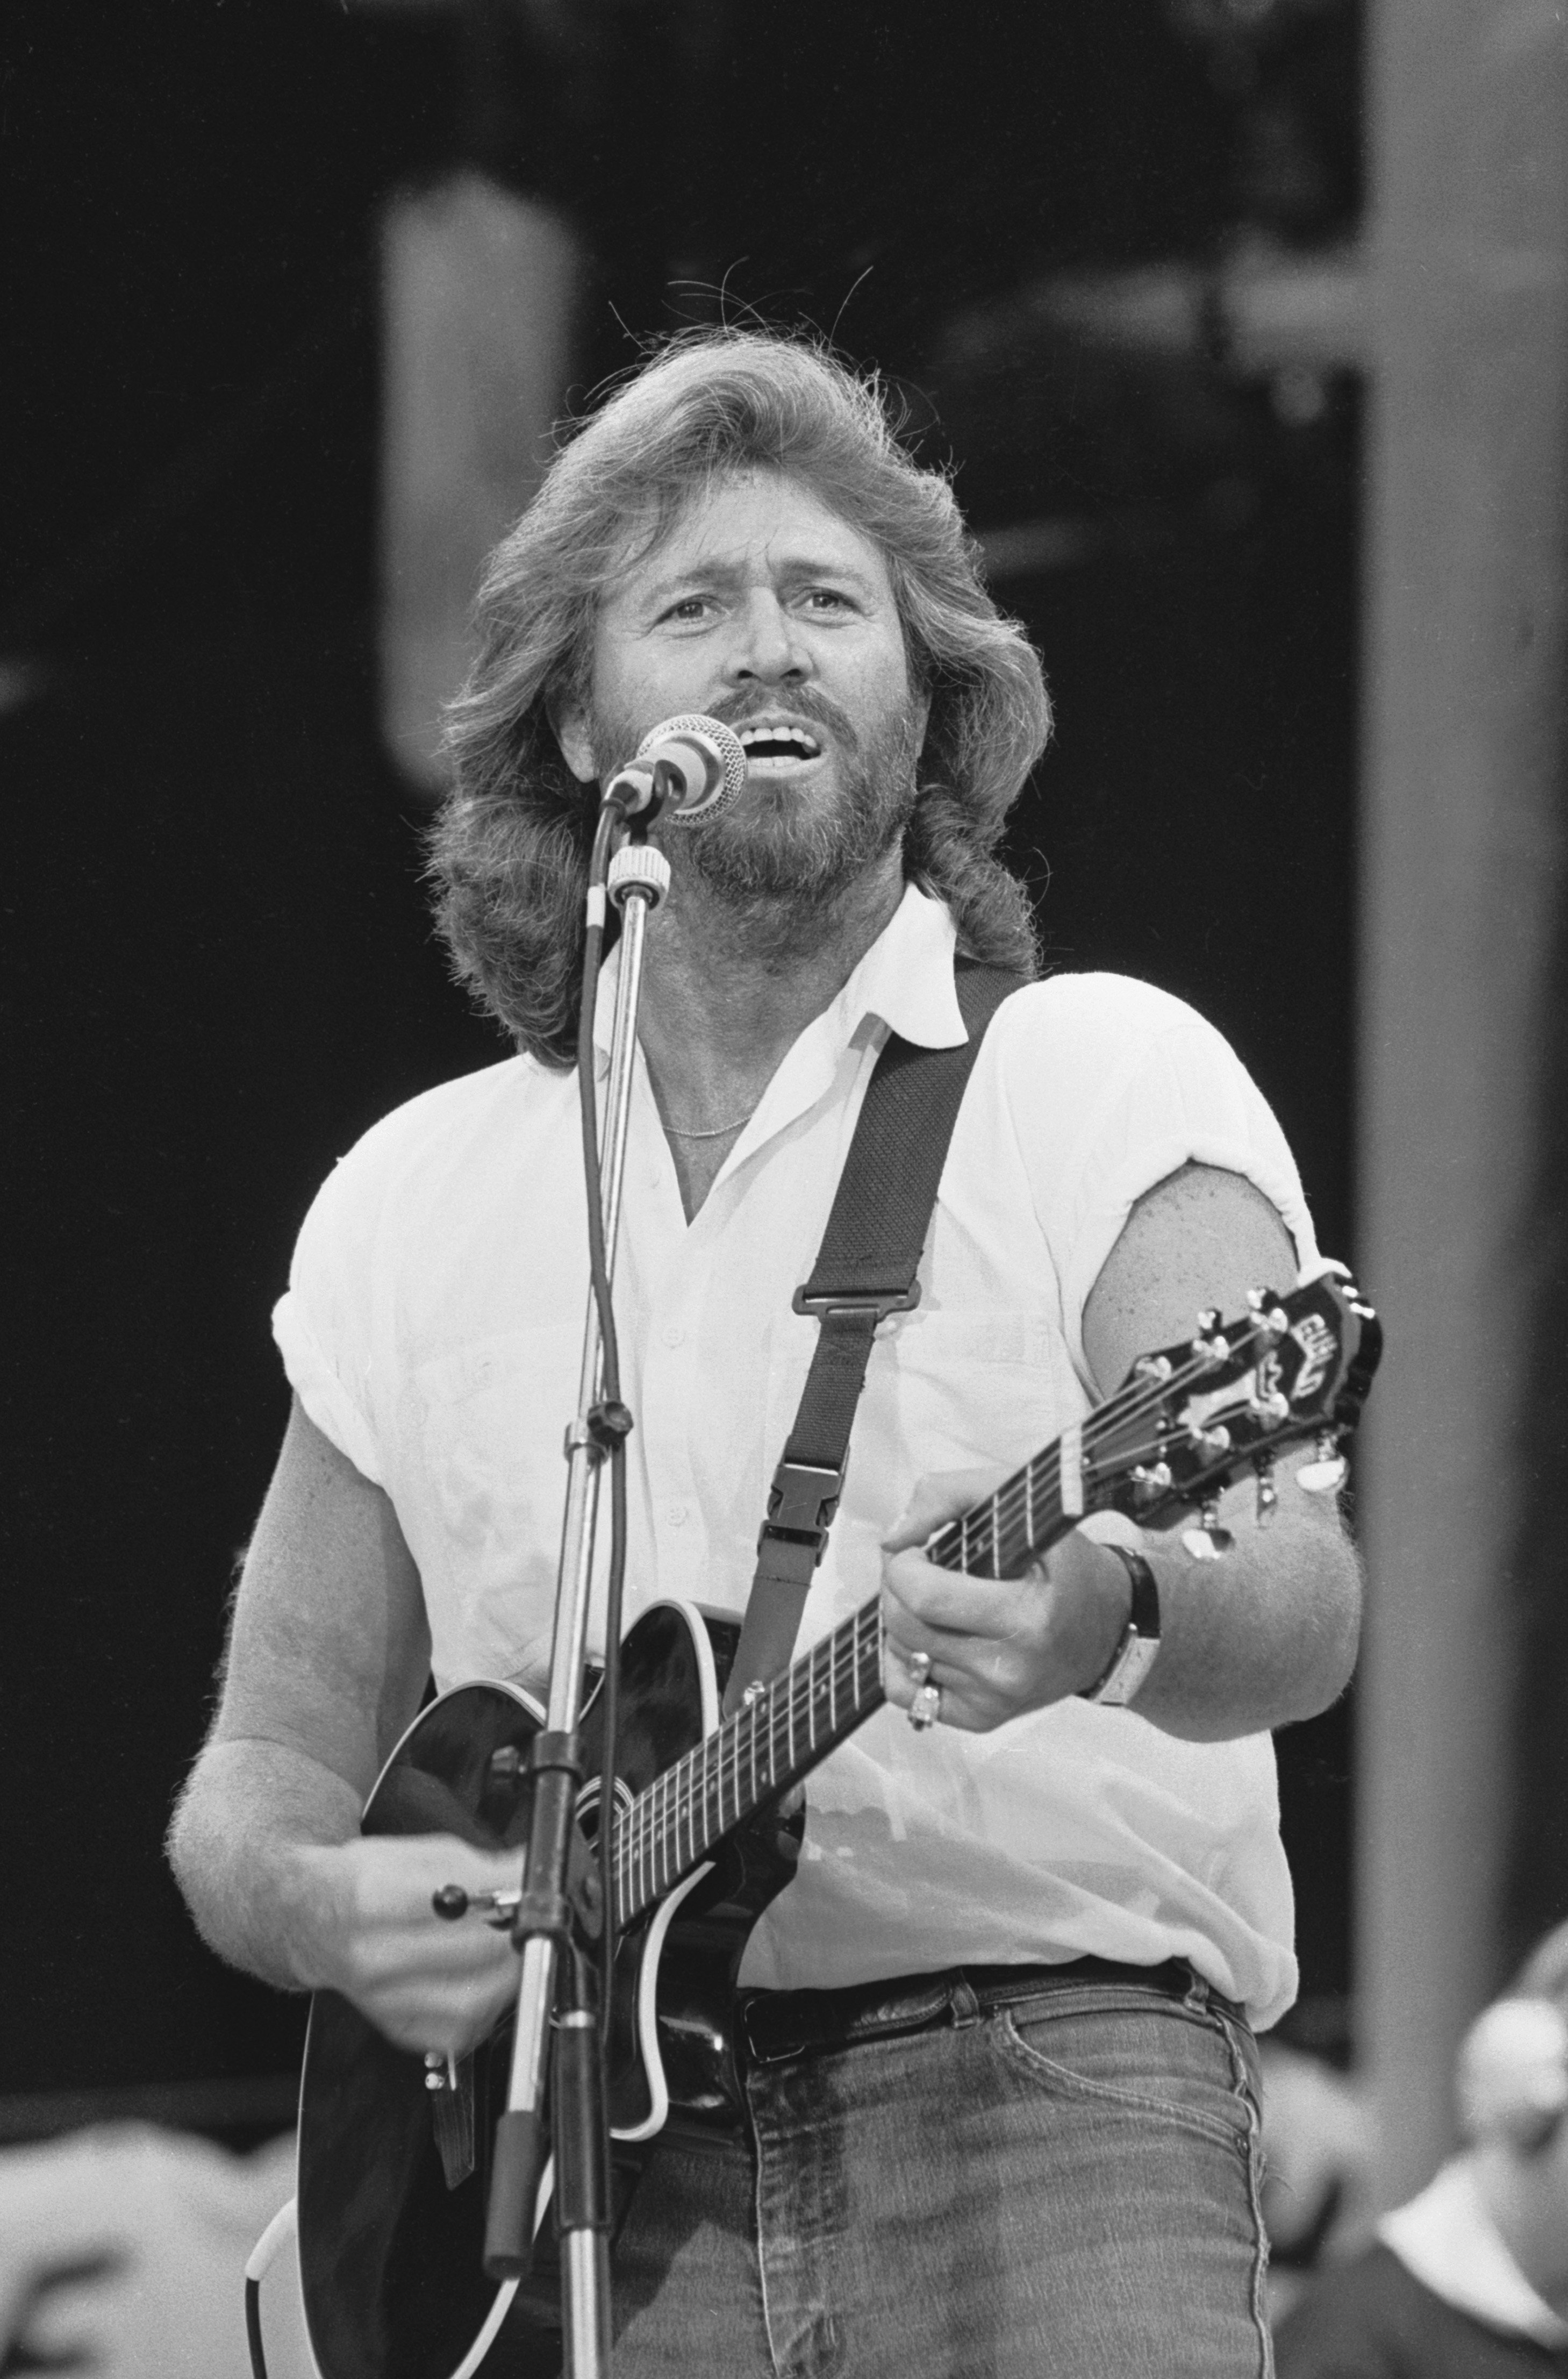 Barry Gibb of the Bee Gees performing at the 70th birthday tribute concert for Nelson Mandela, held at Wembley Stadium in London on June 11, 1988 | Source: Getty Images